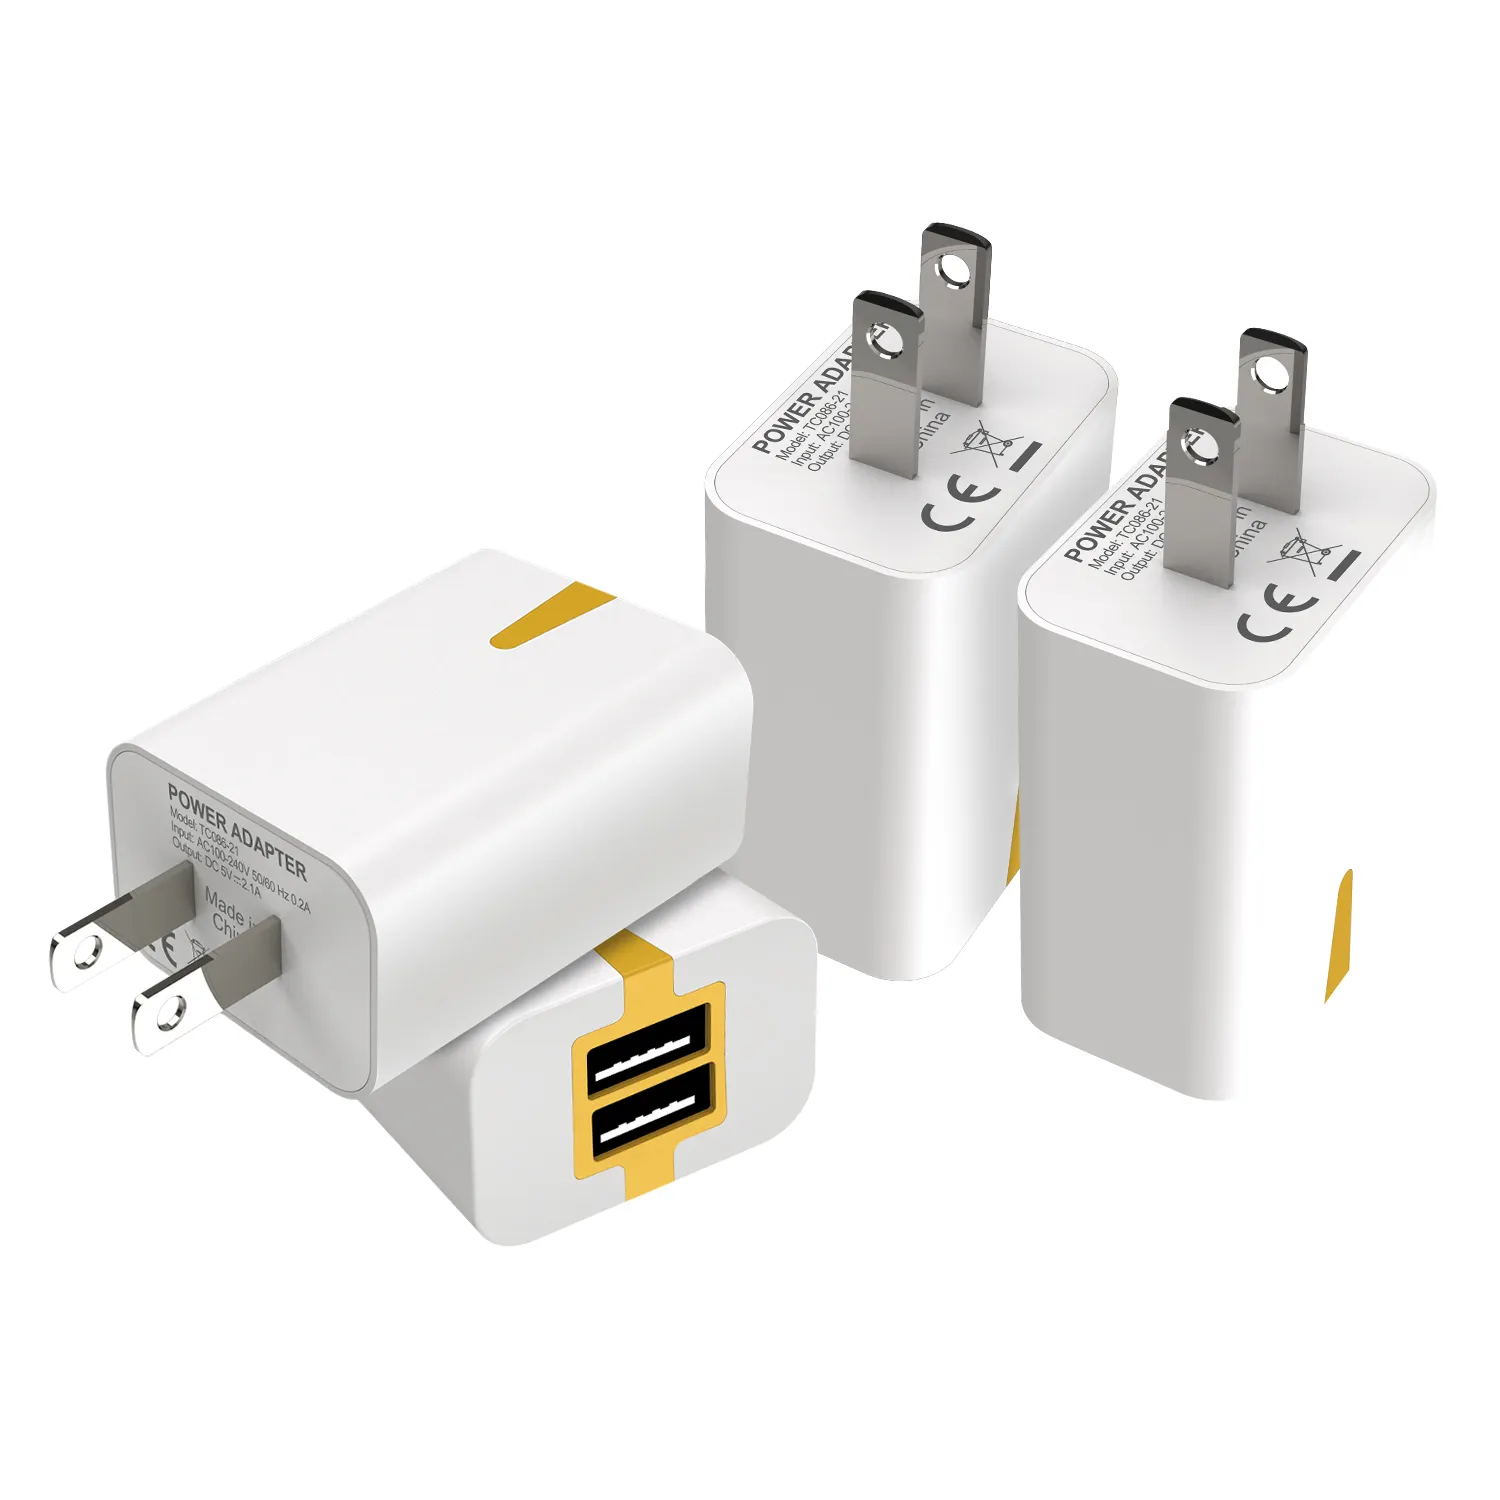 Wholesales JP Plug USB Charger PSE certified 5V 2A Dual USB A 18w rapid charging wall Charger for home business travel